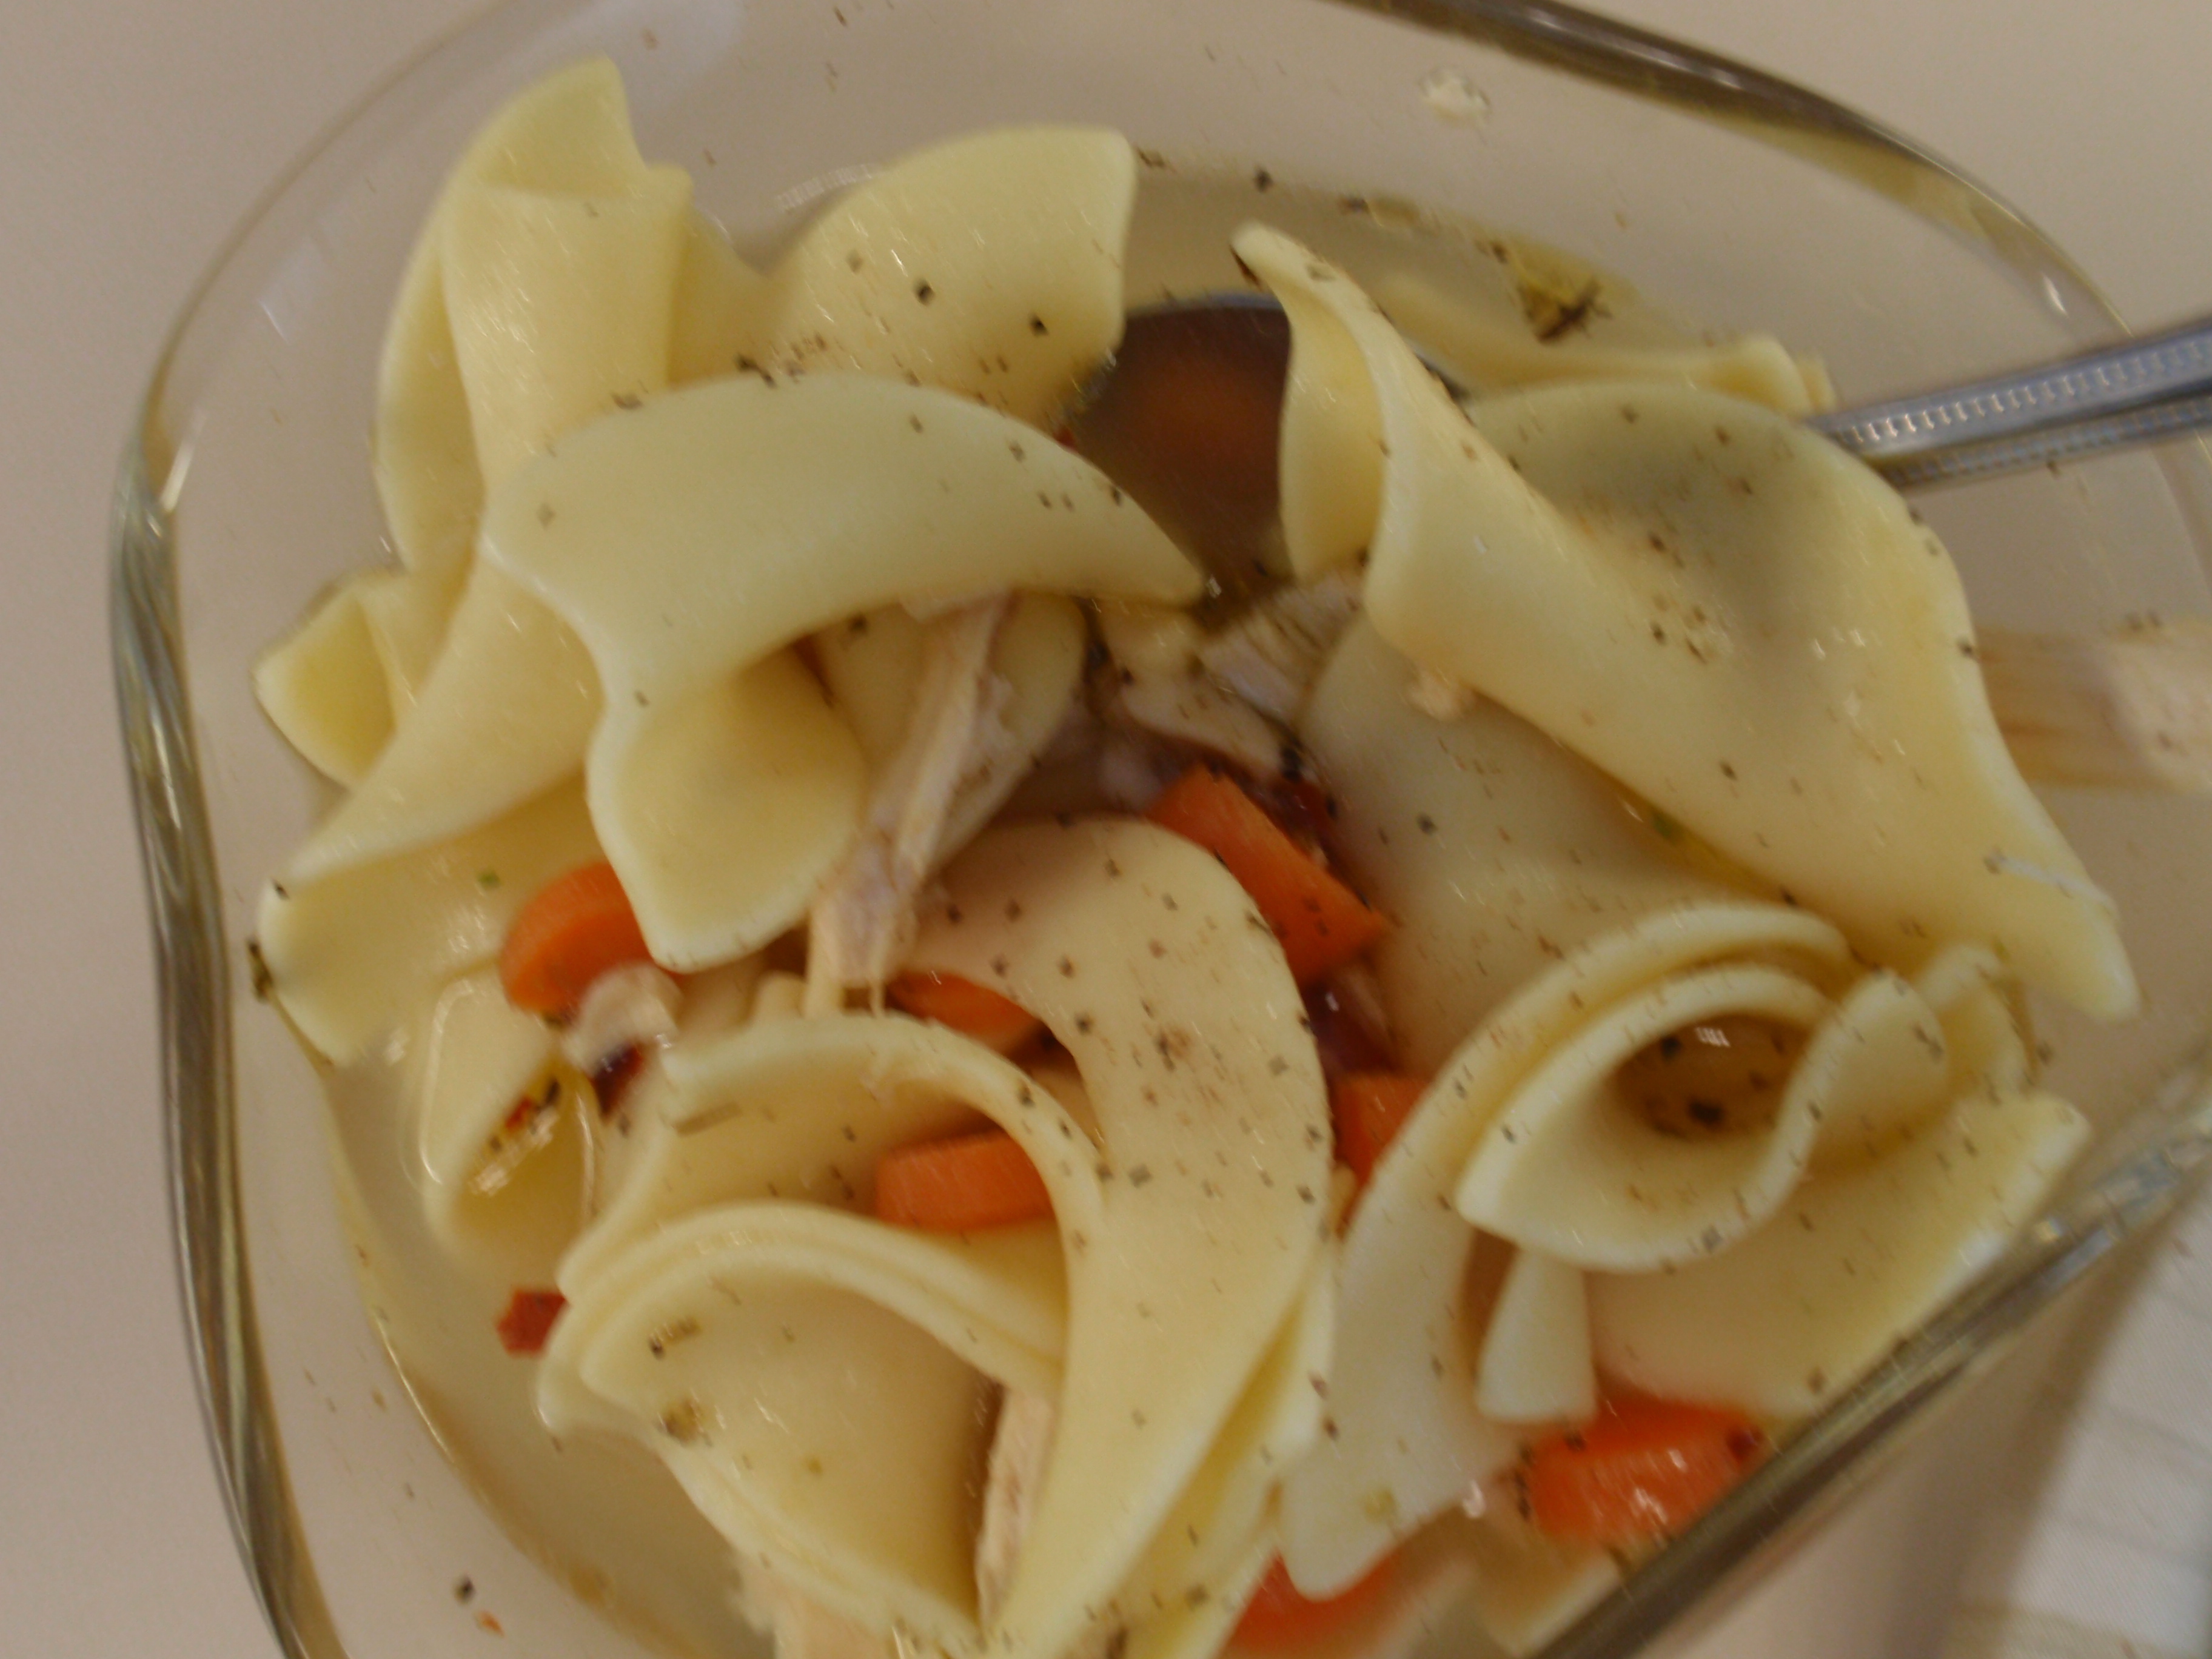 my homemade chicken noodle soup!